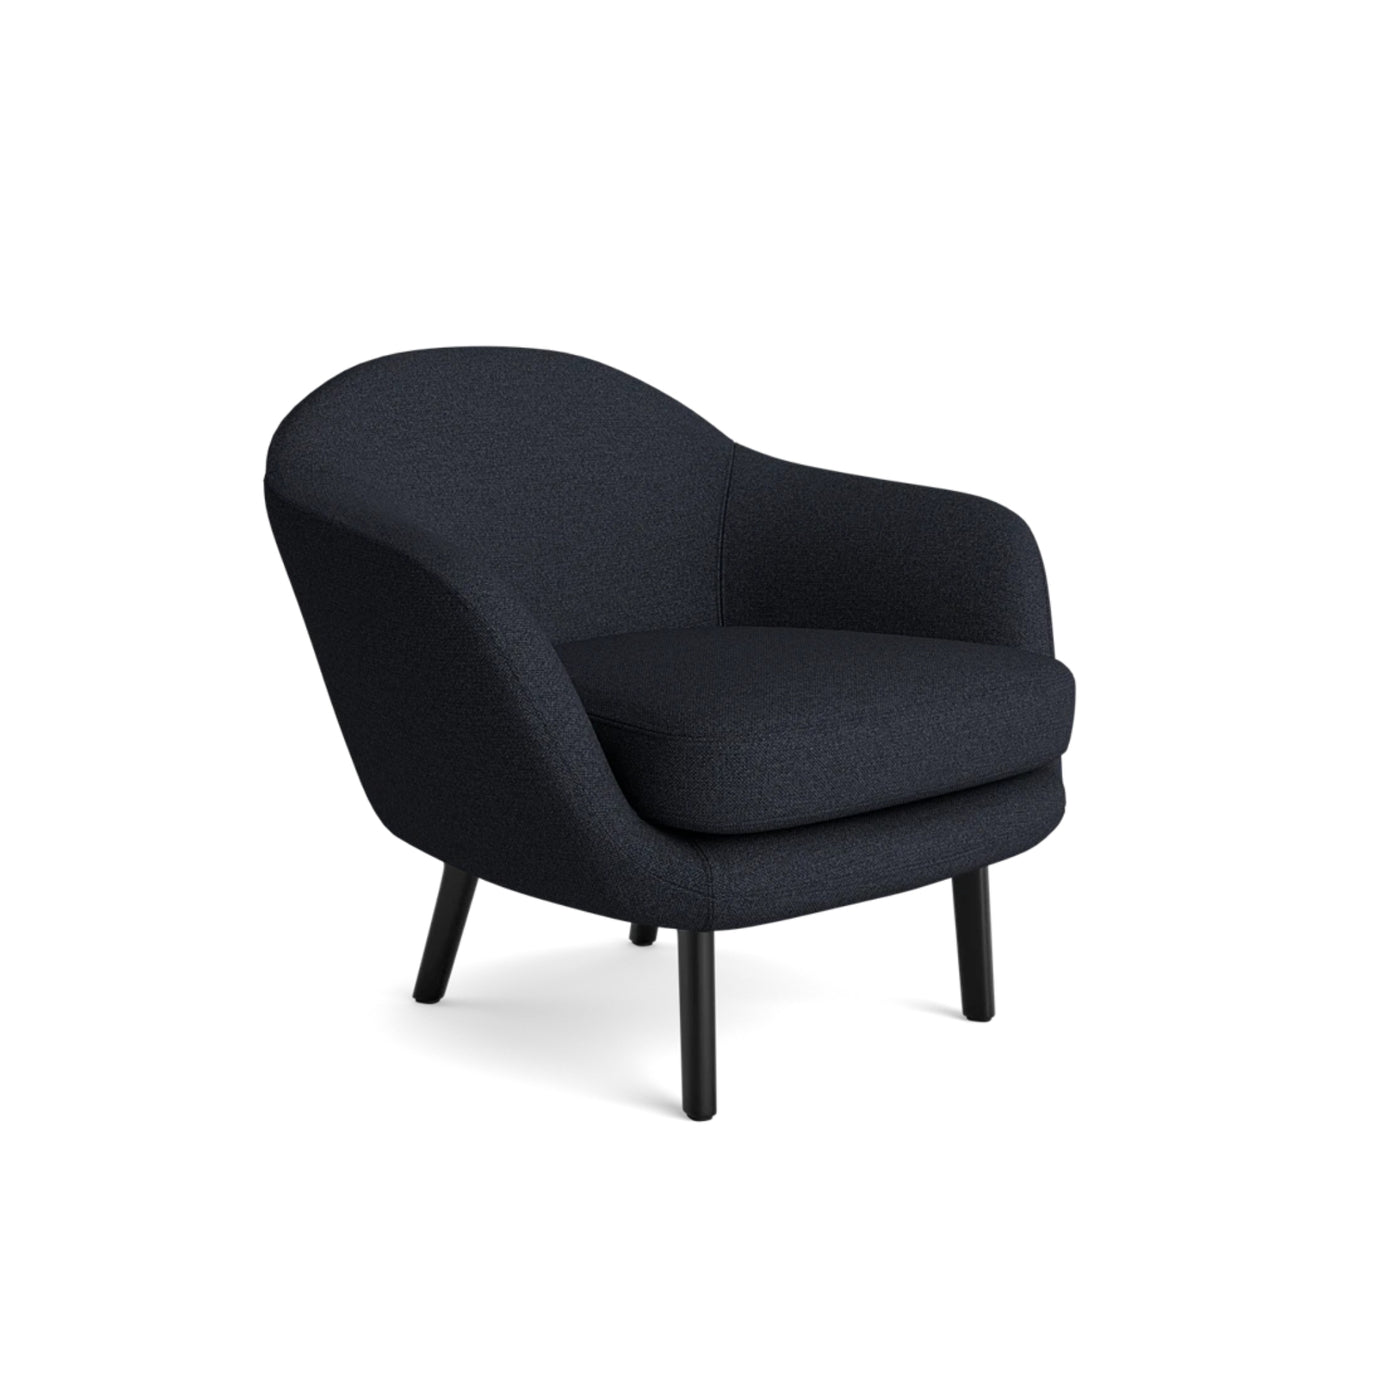 Normann Copenhagen Sum Armchair. Made to order at someday designs. #colour_hallingdal-180